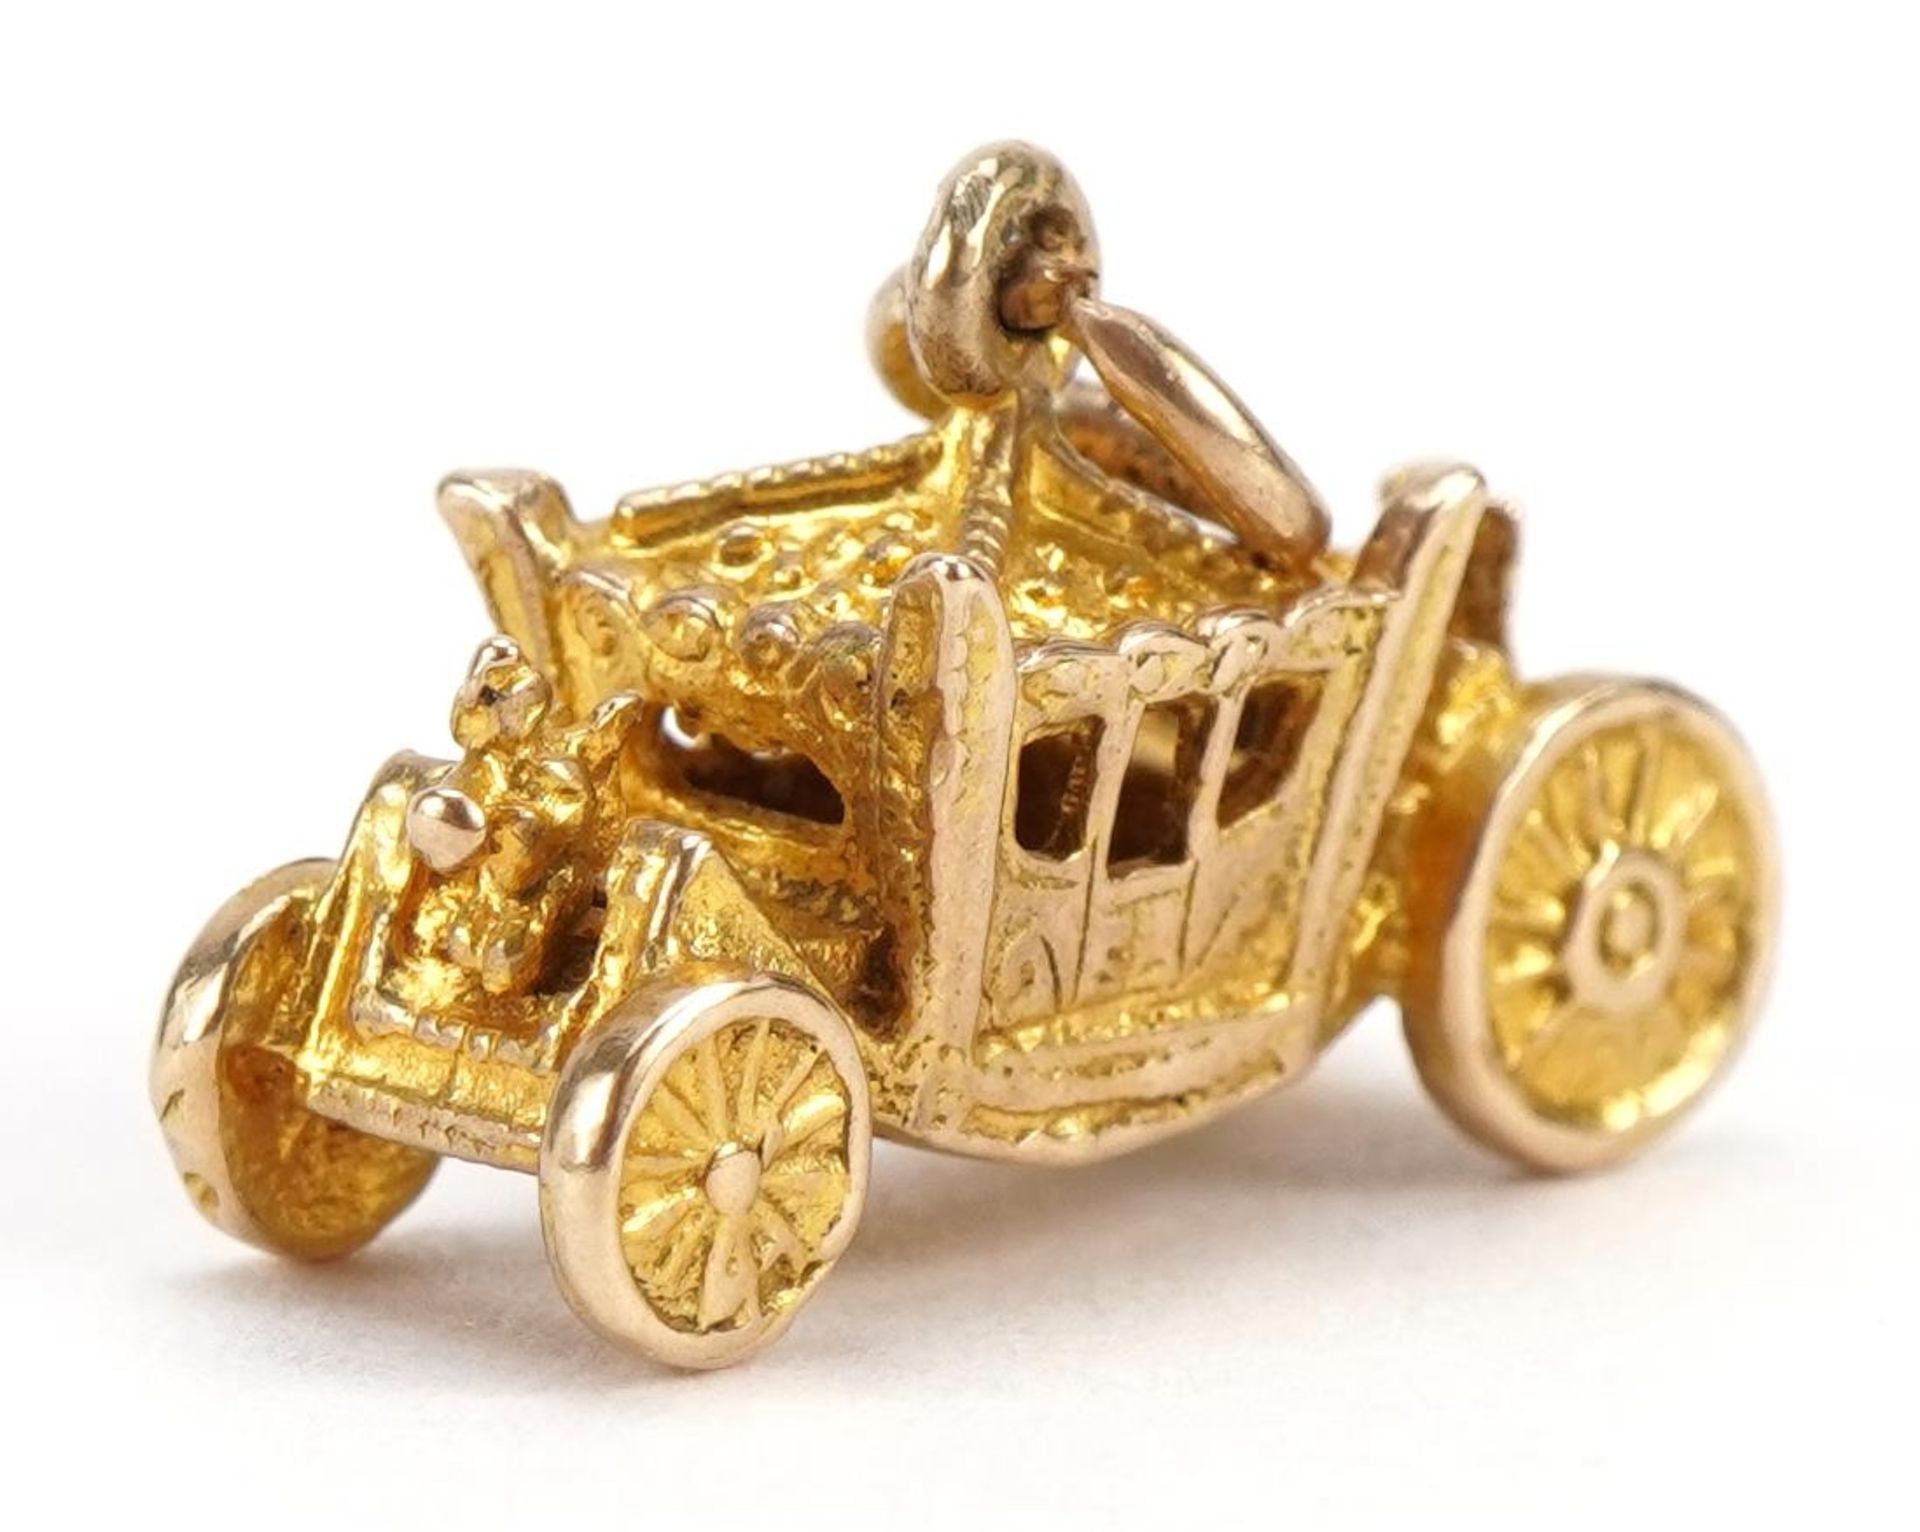 9ct gold royal carriage charm, 1.8cm wide, 2.9g - Image 2 of 3